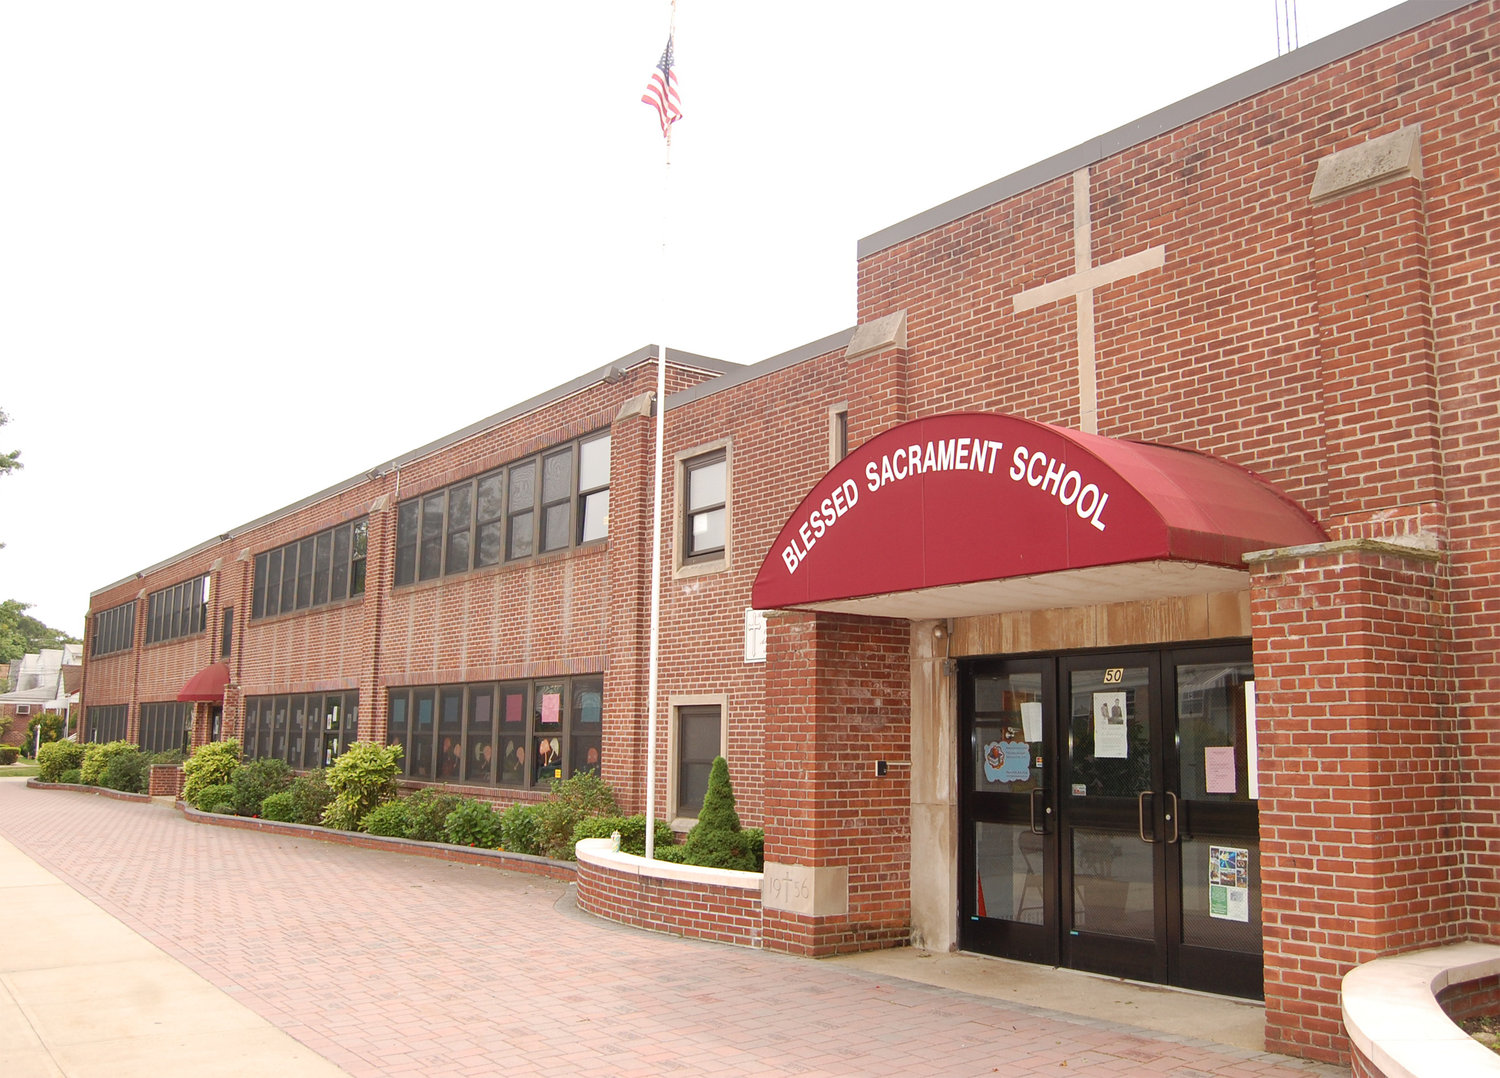 A Martin De Porres school for struggling teenagers opened at the site of the former Blessed Sacrament School, which closed in 2011 due to declining enrollment and had remained empty until September.